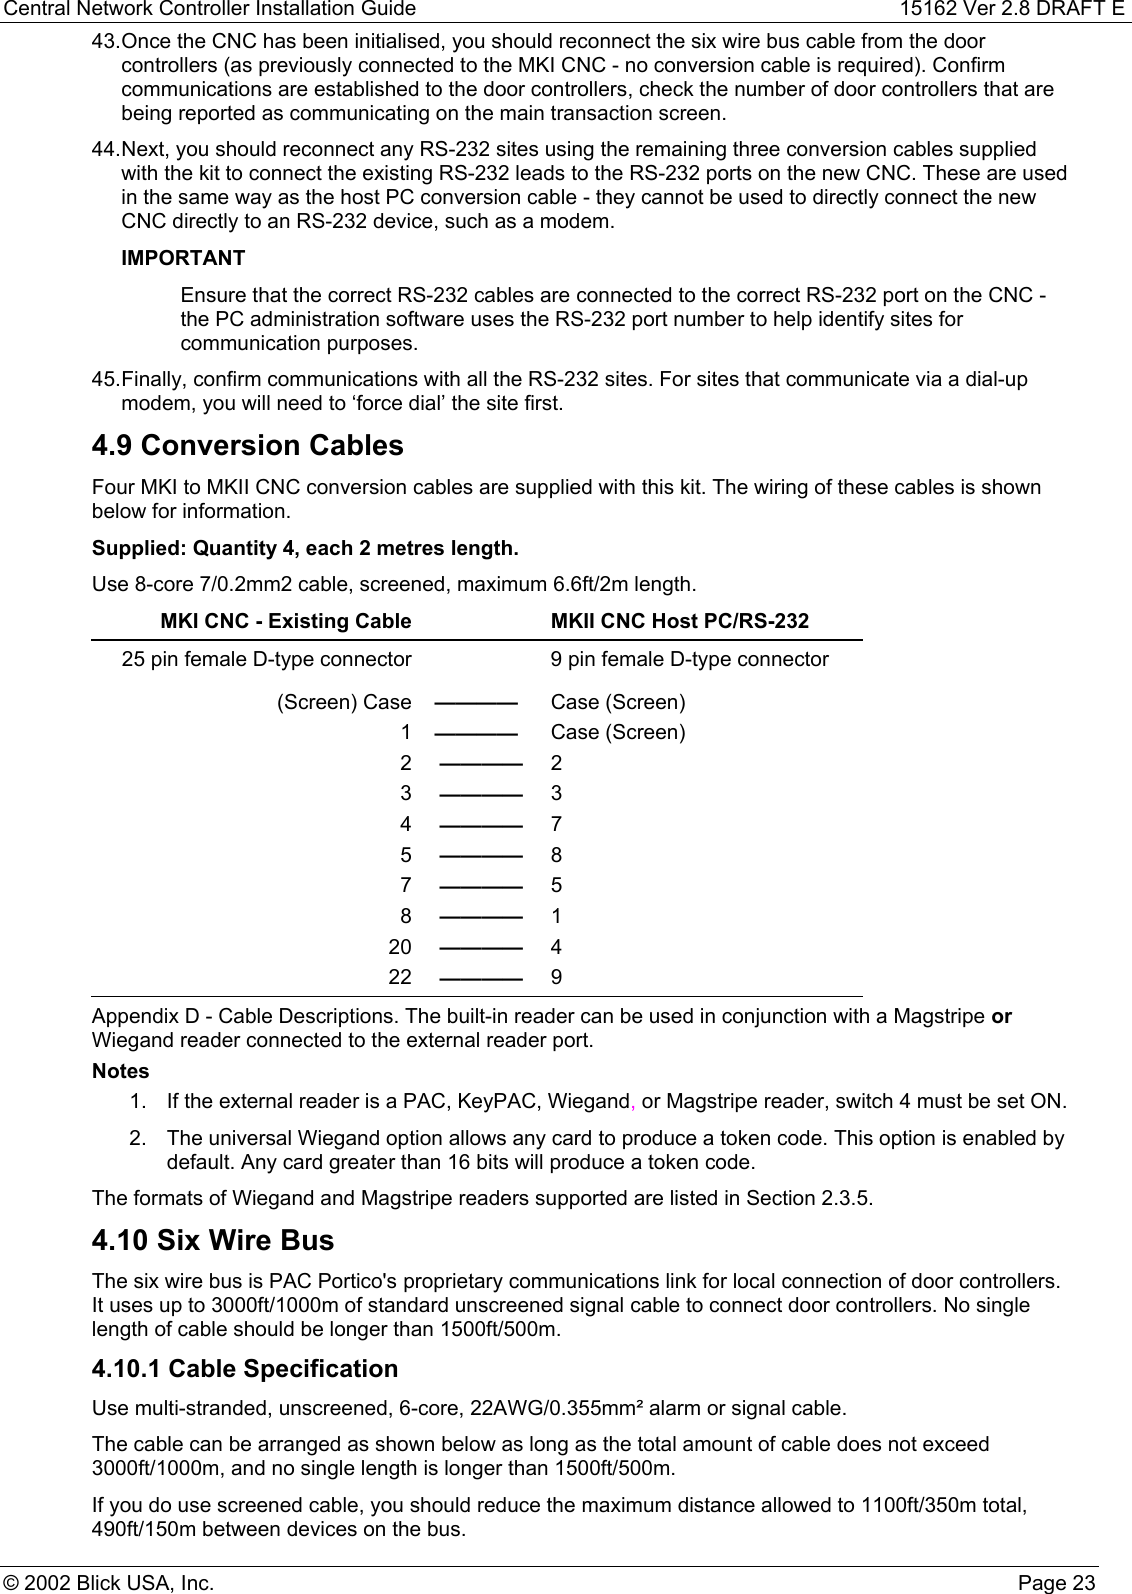 Central Network Controller Installation Guide 15162 Ver 2.8 DRAFT E© 2002 Blick USA, Inc. Page 2343. Once the CNC has been initialised, you should reconnect the six wire bus cable from the doorcontrollers (as previously connected to the MKI CNC - no conversion cable is required). Confirmcommunications are established to the door controllers, check the number of door controllers that arebeing reported as communicating on the main transaction screen.44. Next, you should reconnect any RS-232 sites using the remaining three conversion cables suppliedwith the kit to connect the existing RS-232 leads to the RS-232 ports on the new CNC. These are usedin the same way as the host PC conversion cable - they cannot be used to directly connect the newCNC directly to an RS-232 device, such as a modem.IMPORTANTEnsure that the correct RS-232 cables are connected to the correct RS-232 port on the CNC -the PC administration software uses the RS-232 port number to help identify sites forcommunication purposes.45. Finally, confirm communications with all the RS-232 sites. For sites that communicate via a dial-upmodem, you will need to ‘force dial’ the site first.4.9 Conversion CablesFour MKI to MKII CNC conversion cables are supplied with this kit. The wiring of these cables is shownbelow for information.Supplied: Quantity 4, each 2 metres length.Use 8-core 7/0.2mm2 cable, screened, maximum 6.6ft/2m length.MKI CNC - Existing Cable MKII CNC Host PC/RS-23225 pin female D-type connector 9 pin female D-type connector(Screen) Case ———— Case (Screen)1———— Case (Screen)2———— 23———— 34———— 75———— 87———— 58———— 120 ———— 422 ———— 9Appendix D - Cable Descriptions. The built-in reader can be used in conjunction with a Magstripe orWiegand reader connected to the external reader port.Notes1.  If the external reader is a PAC, KeyPAC, Wiegand, or Magstripe reader, switch 4 must be set ON.2.  The universal Wiegand option allows any card to produce a token code. This option is enabled bydefault. Any card greater than 16 bits will produce a token code.The formats of Wiegand and Magstripe readers supported are listed in Section 2.3.5.4.10 Six Wire BusThe six wire bus is PAC Portico&apos;s proprietary communications link for local connection of door controllers.It uses up to 3000ft/1000m of standard unscreened signal cable to connect door controllers. No singlelength of cable should be longer than 1500ft/500m.4.10.1 Cable SpecificationUse multi-stranded, unscreened, 6-core, 22AWG/0.355mm² alarm or signal cable.The cable can be arranged as shown below as long as the total amount of cable does not exceed3000ft/1000m, and no single length is longer than 1500ft/500m.If you do use screened cable, you should reduce the maximum distance allowed to 1100ft/350m total,490ft/150m between devices on the bus.